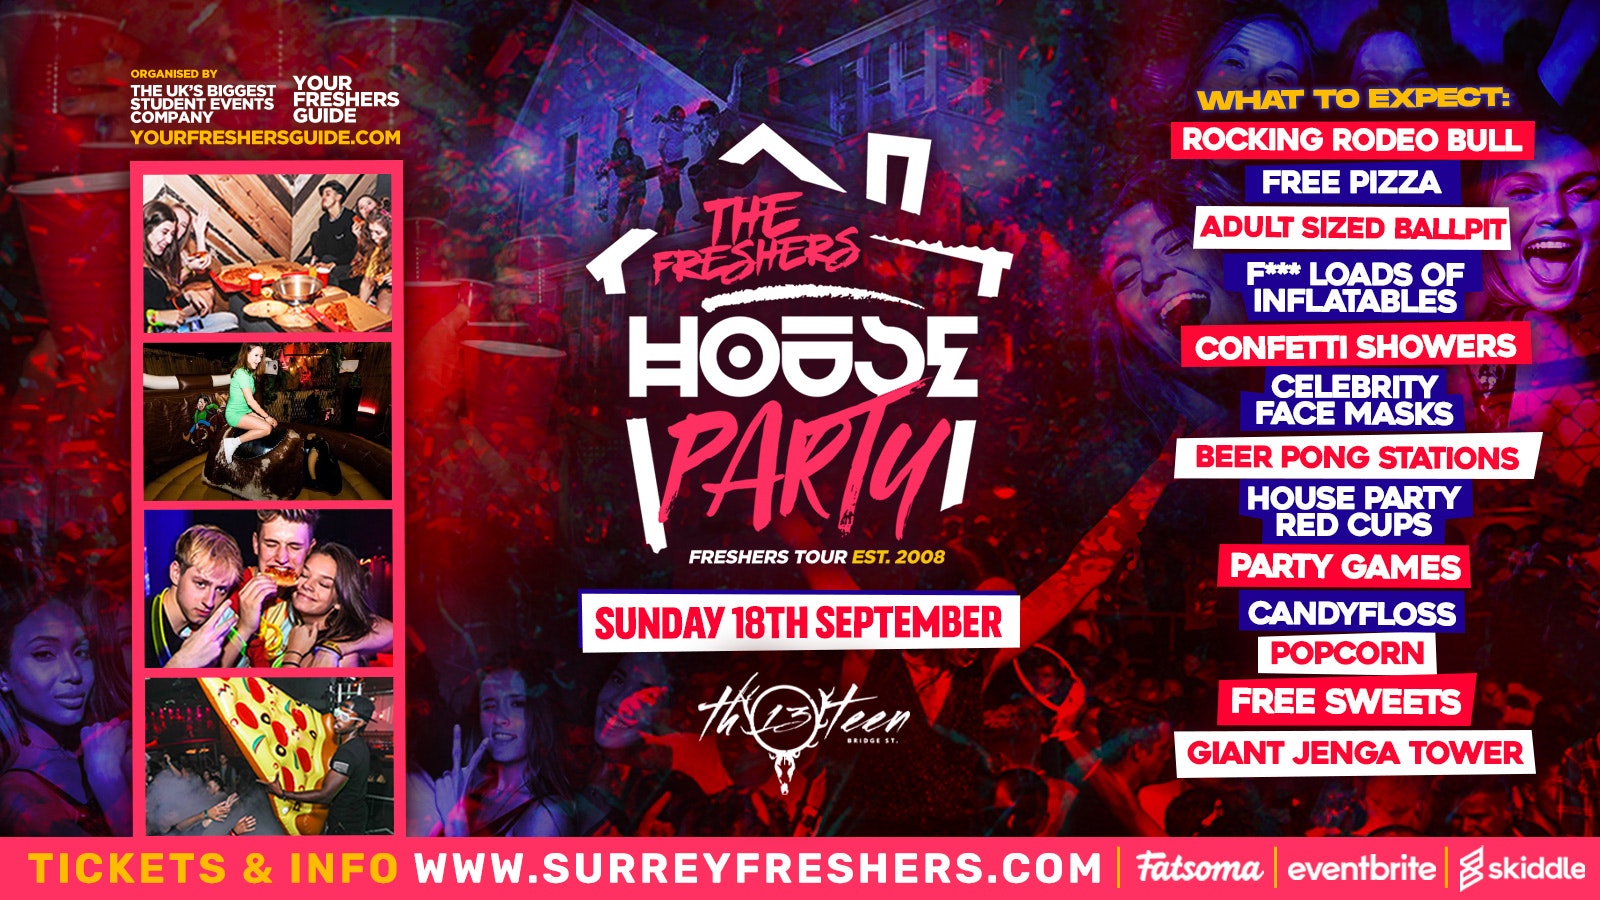 The Freshers House Party / Surrey Freshers 2022 / Guildford Freshers 2022